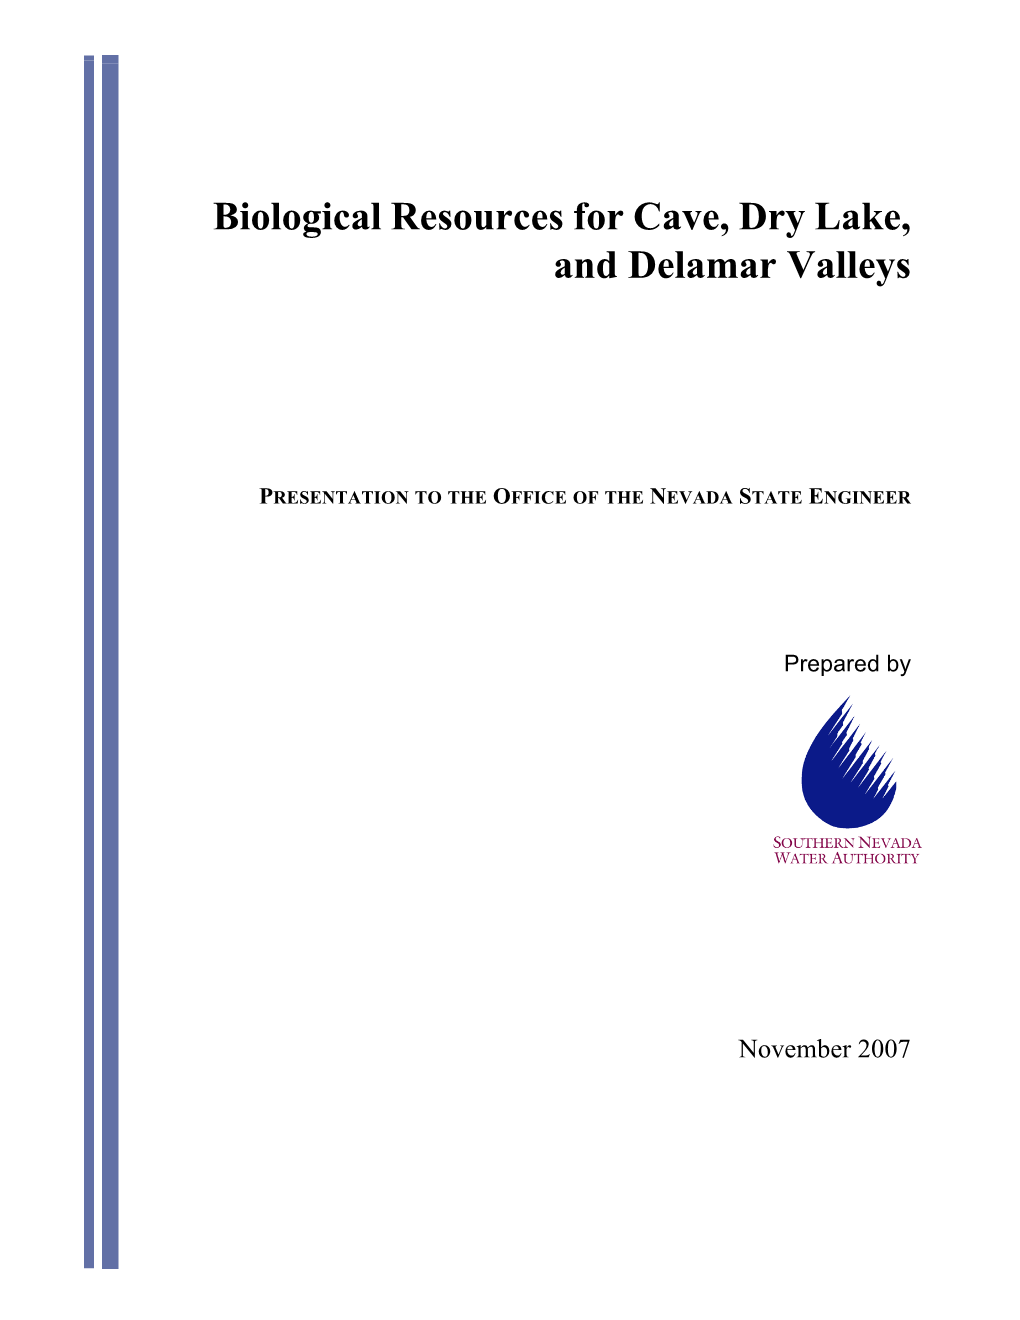 Biological Resources for Cave, Dry Lake, and Delamar Valleys